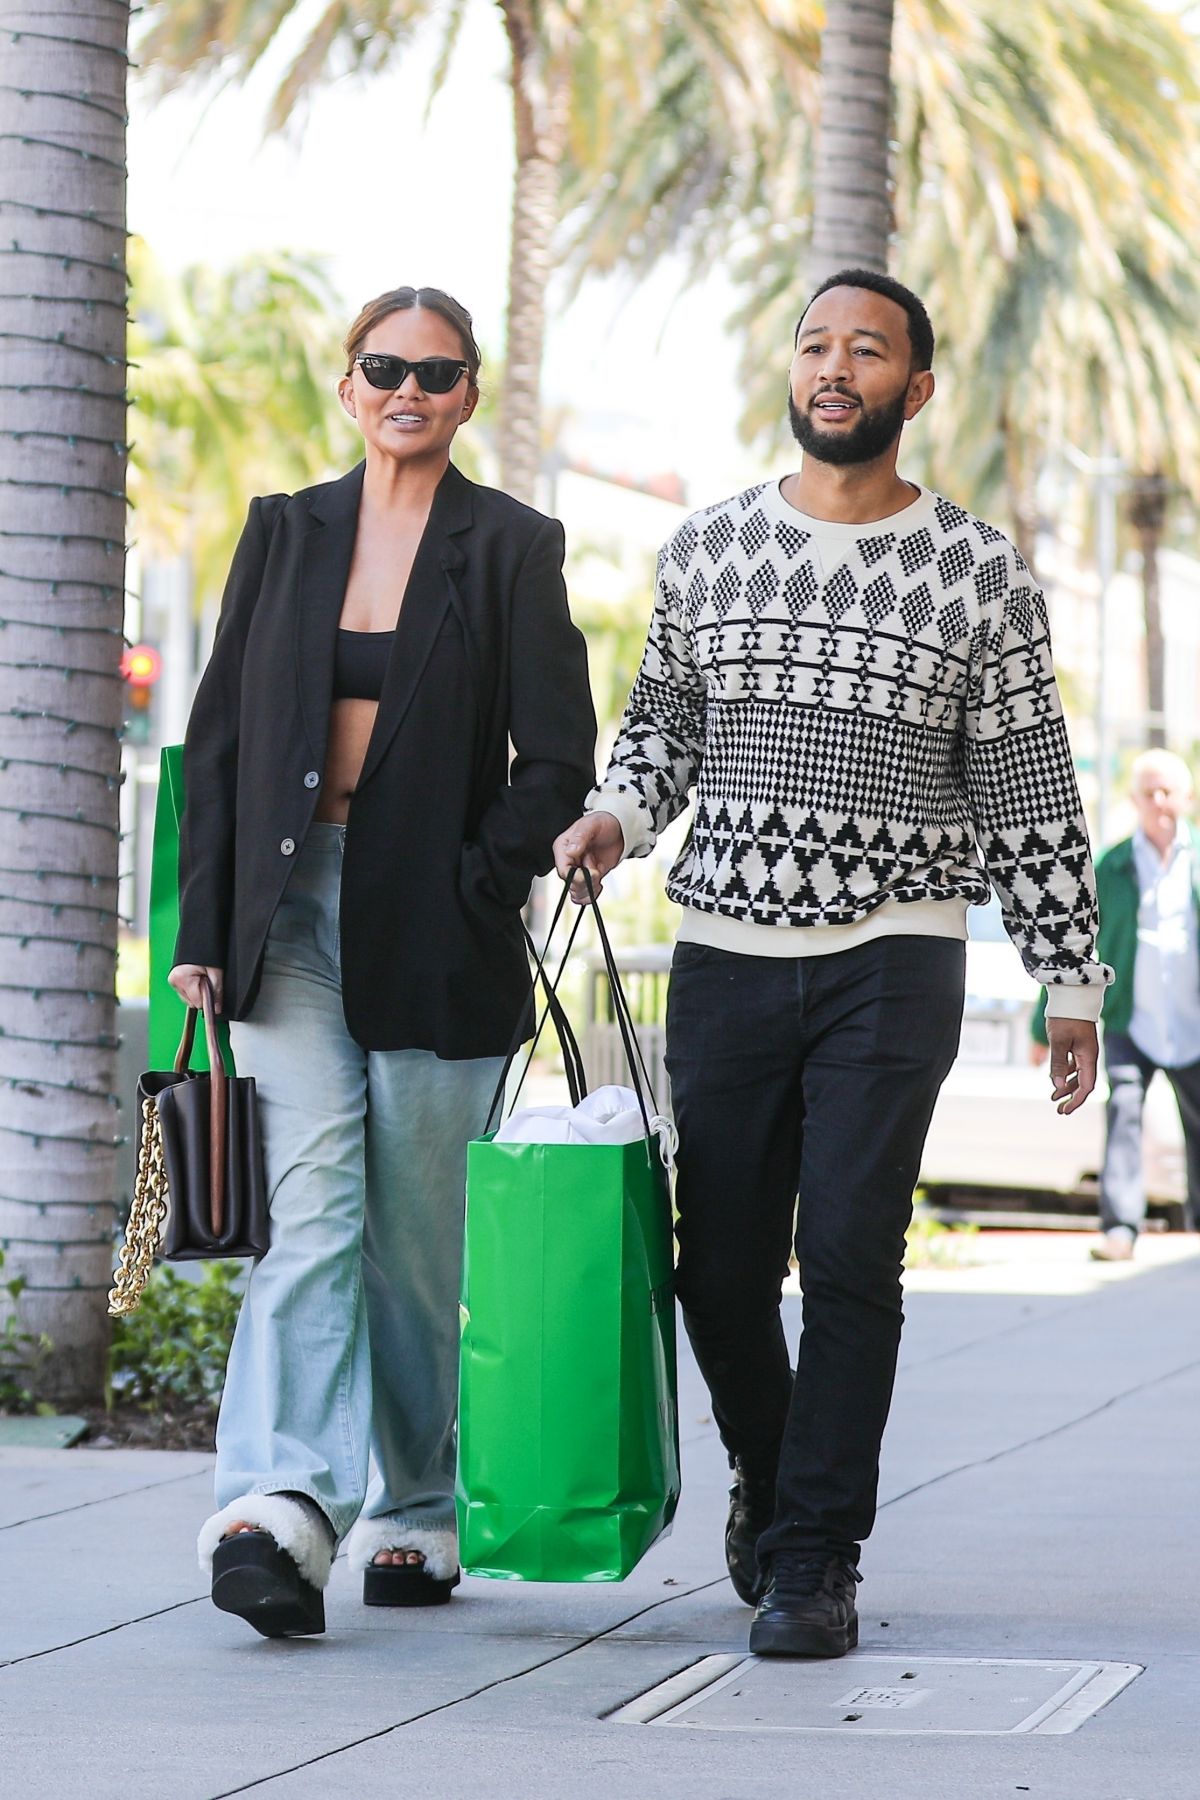 Rodeo Drive - A celebrity moment on Rodeo Drive: John Legend and